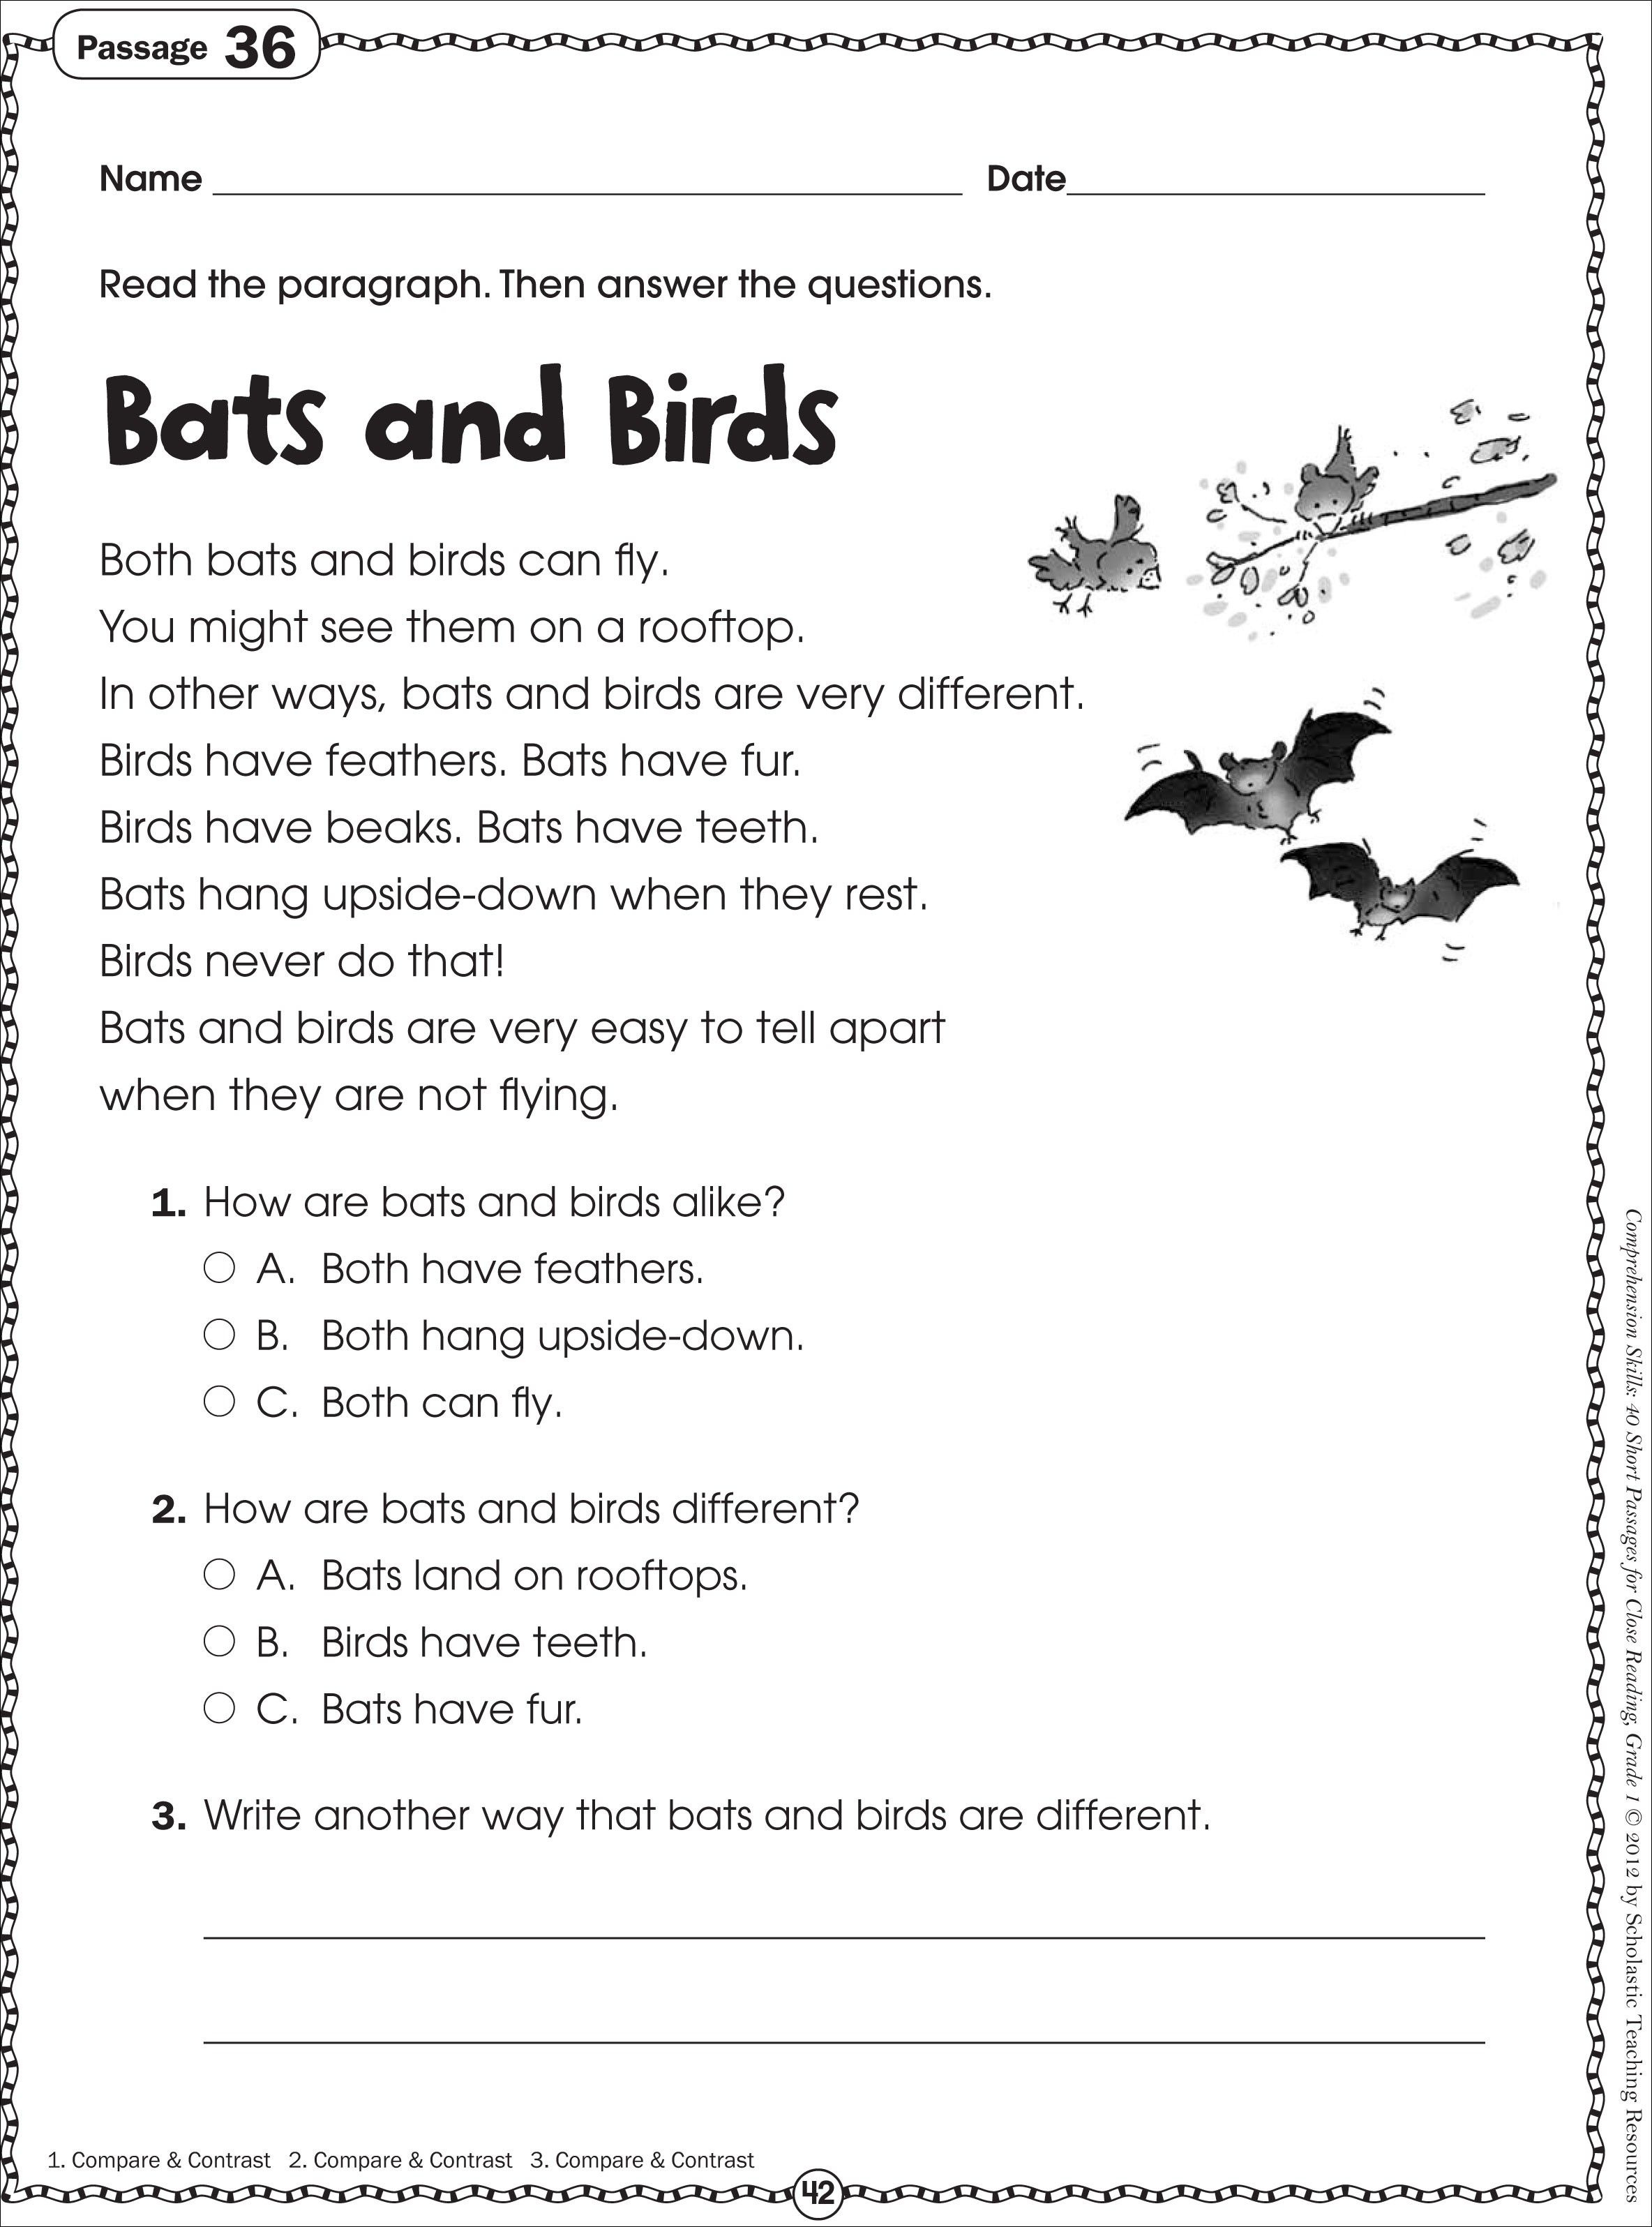 free-printable-literacy-worksheets-for-adults-free-printable